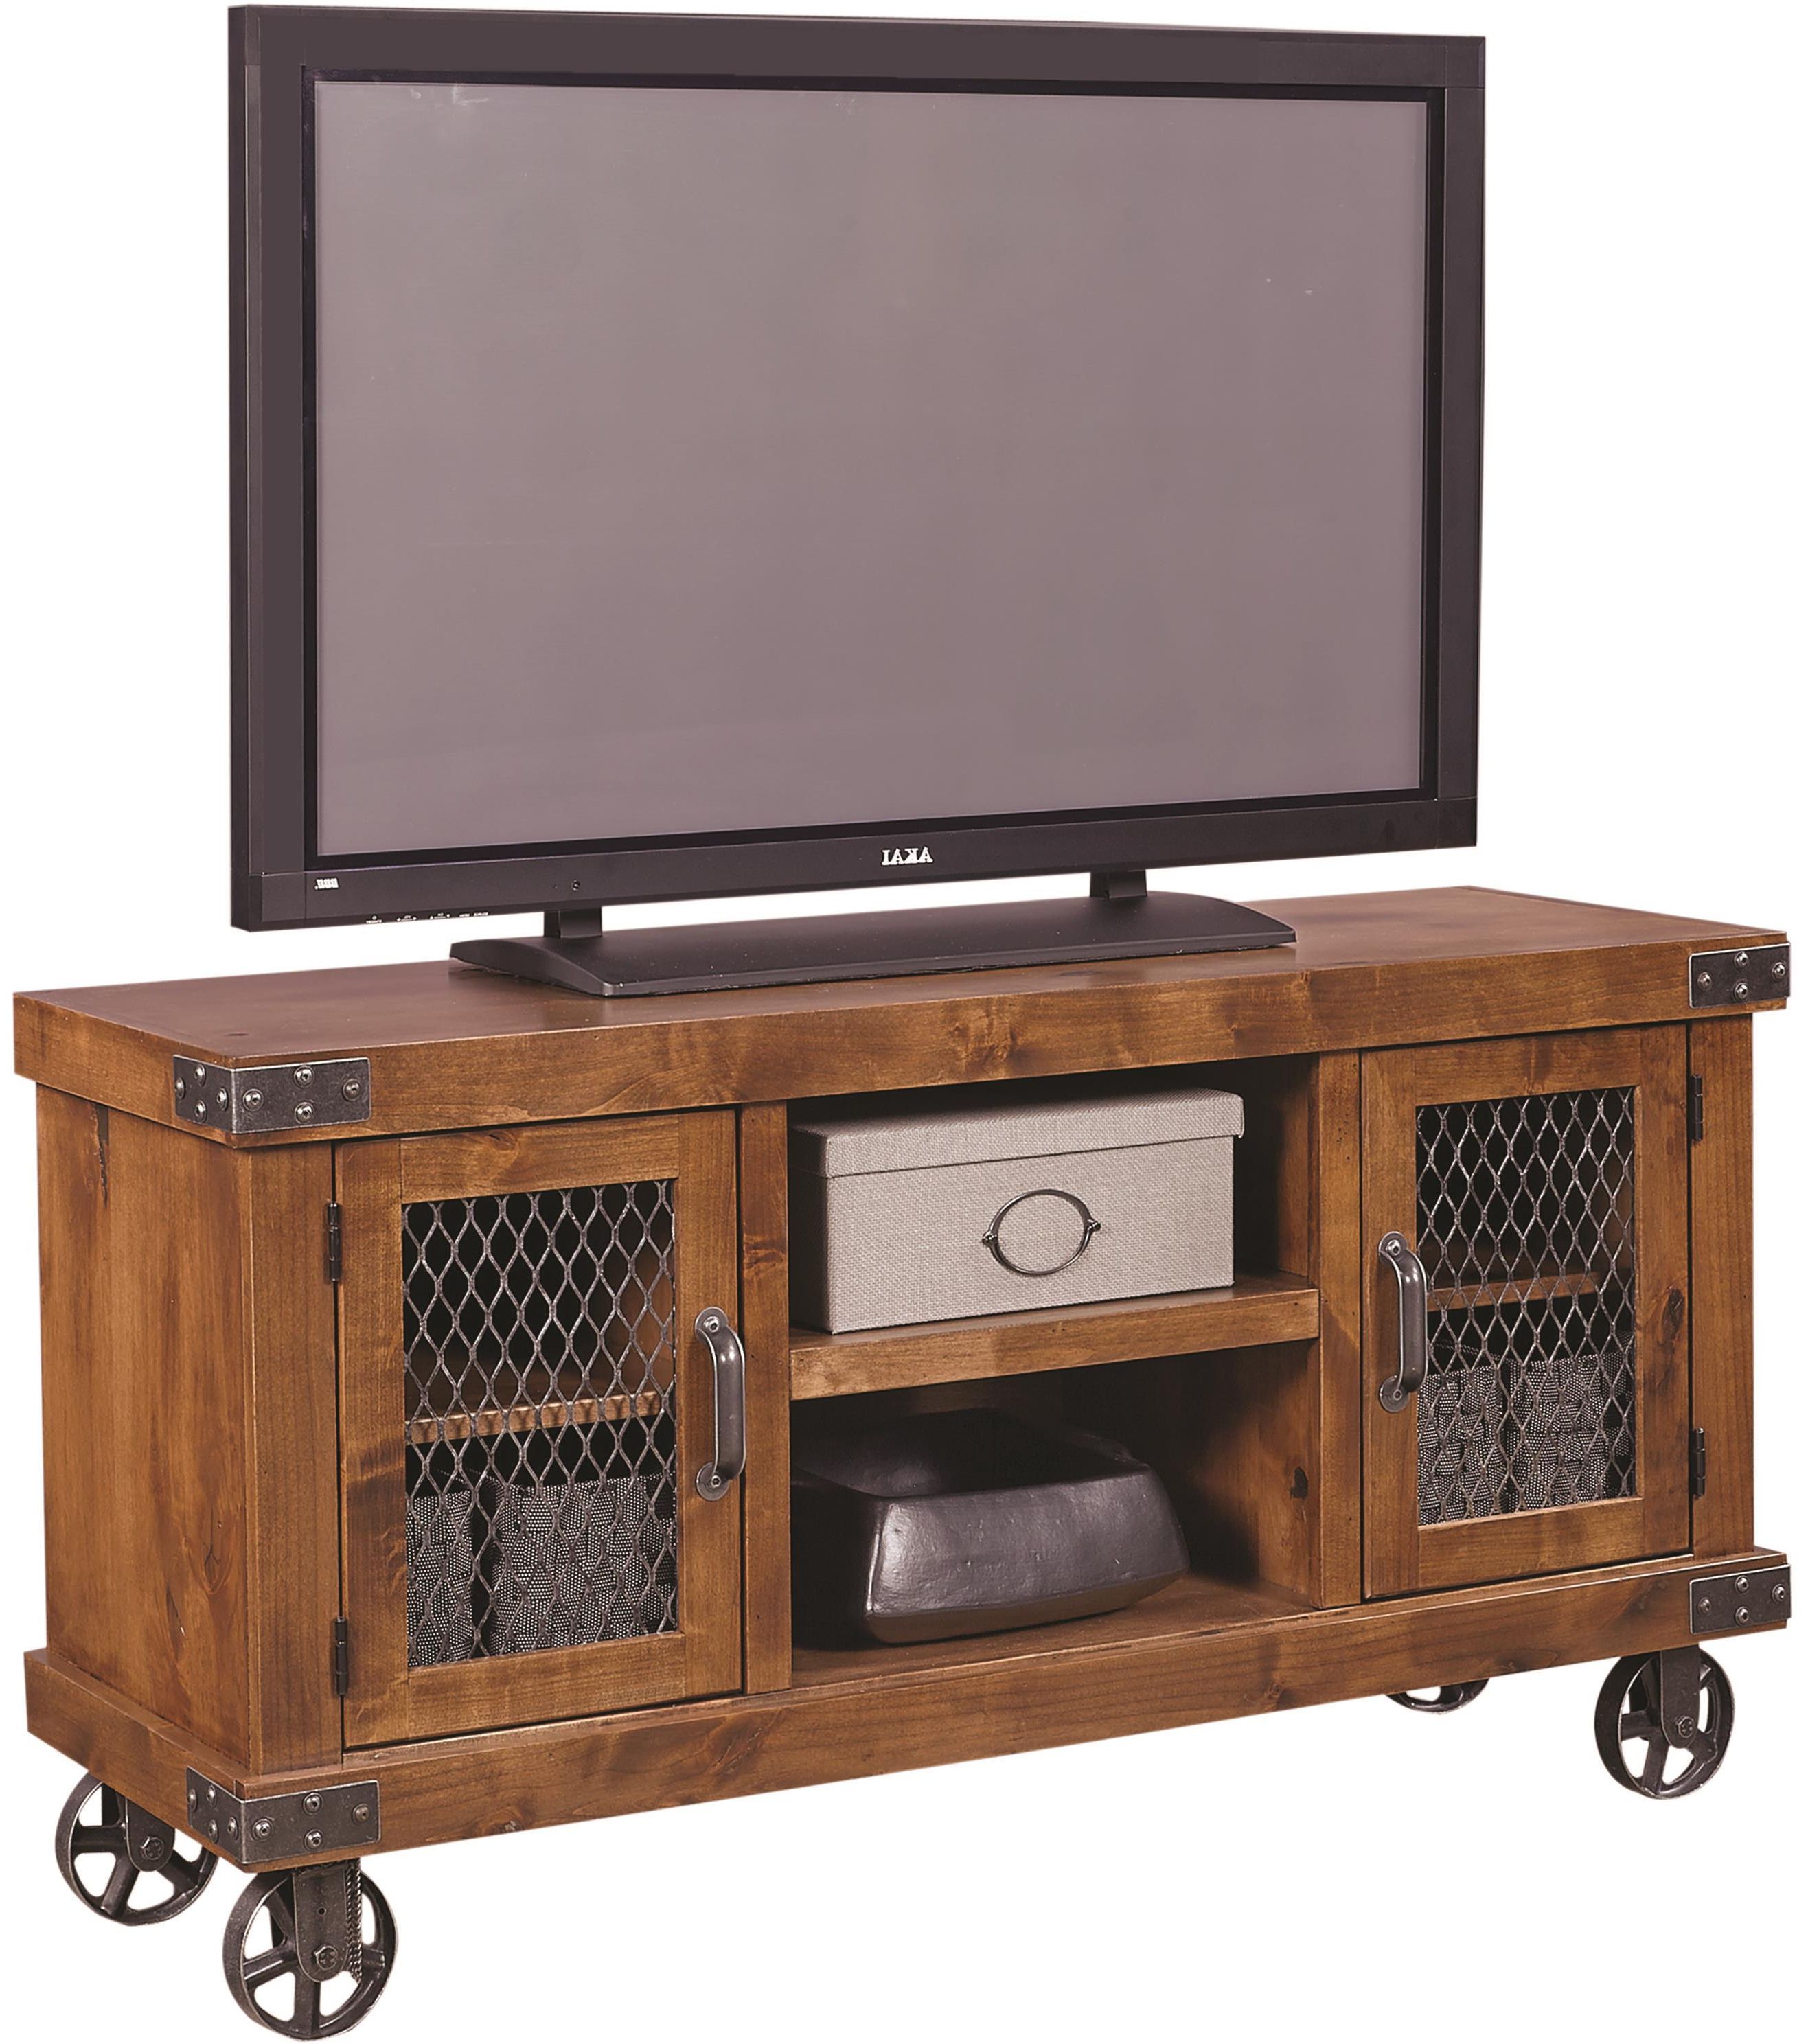 Rustic Corner Tv Stand Canada With Barn Doors Plus White Together Uk For Famous Rustic Corner Tv Cabinets (View 11 of 20)